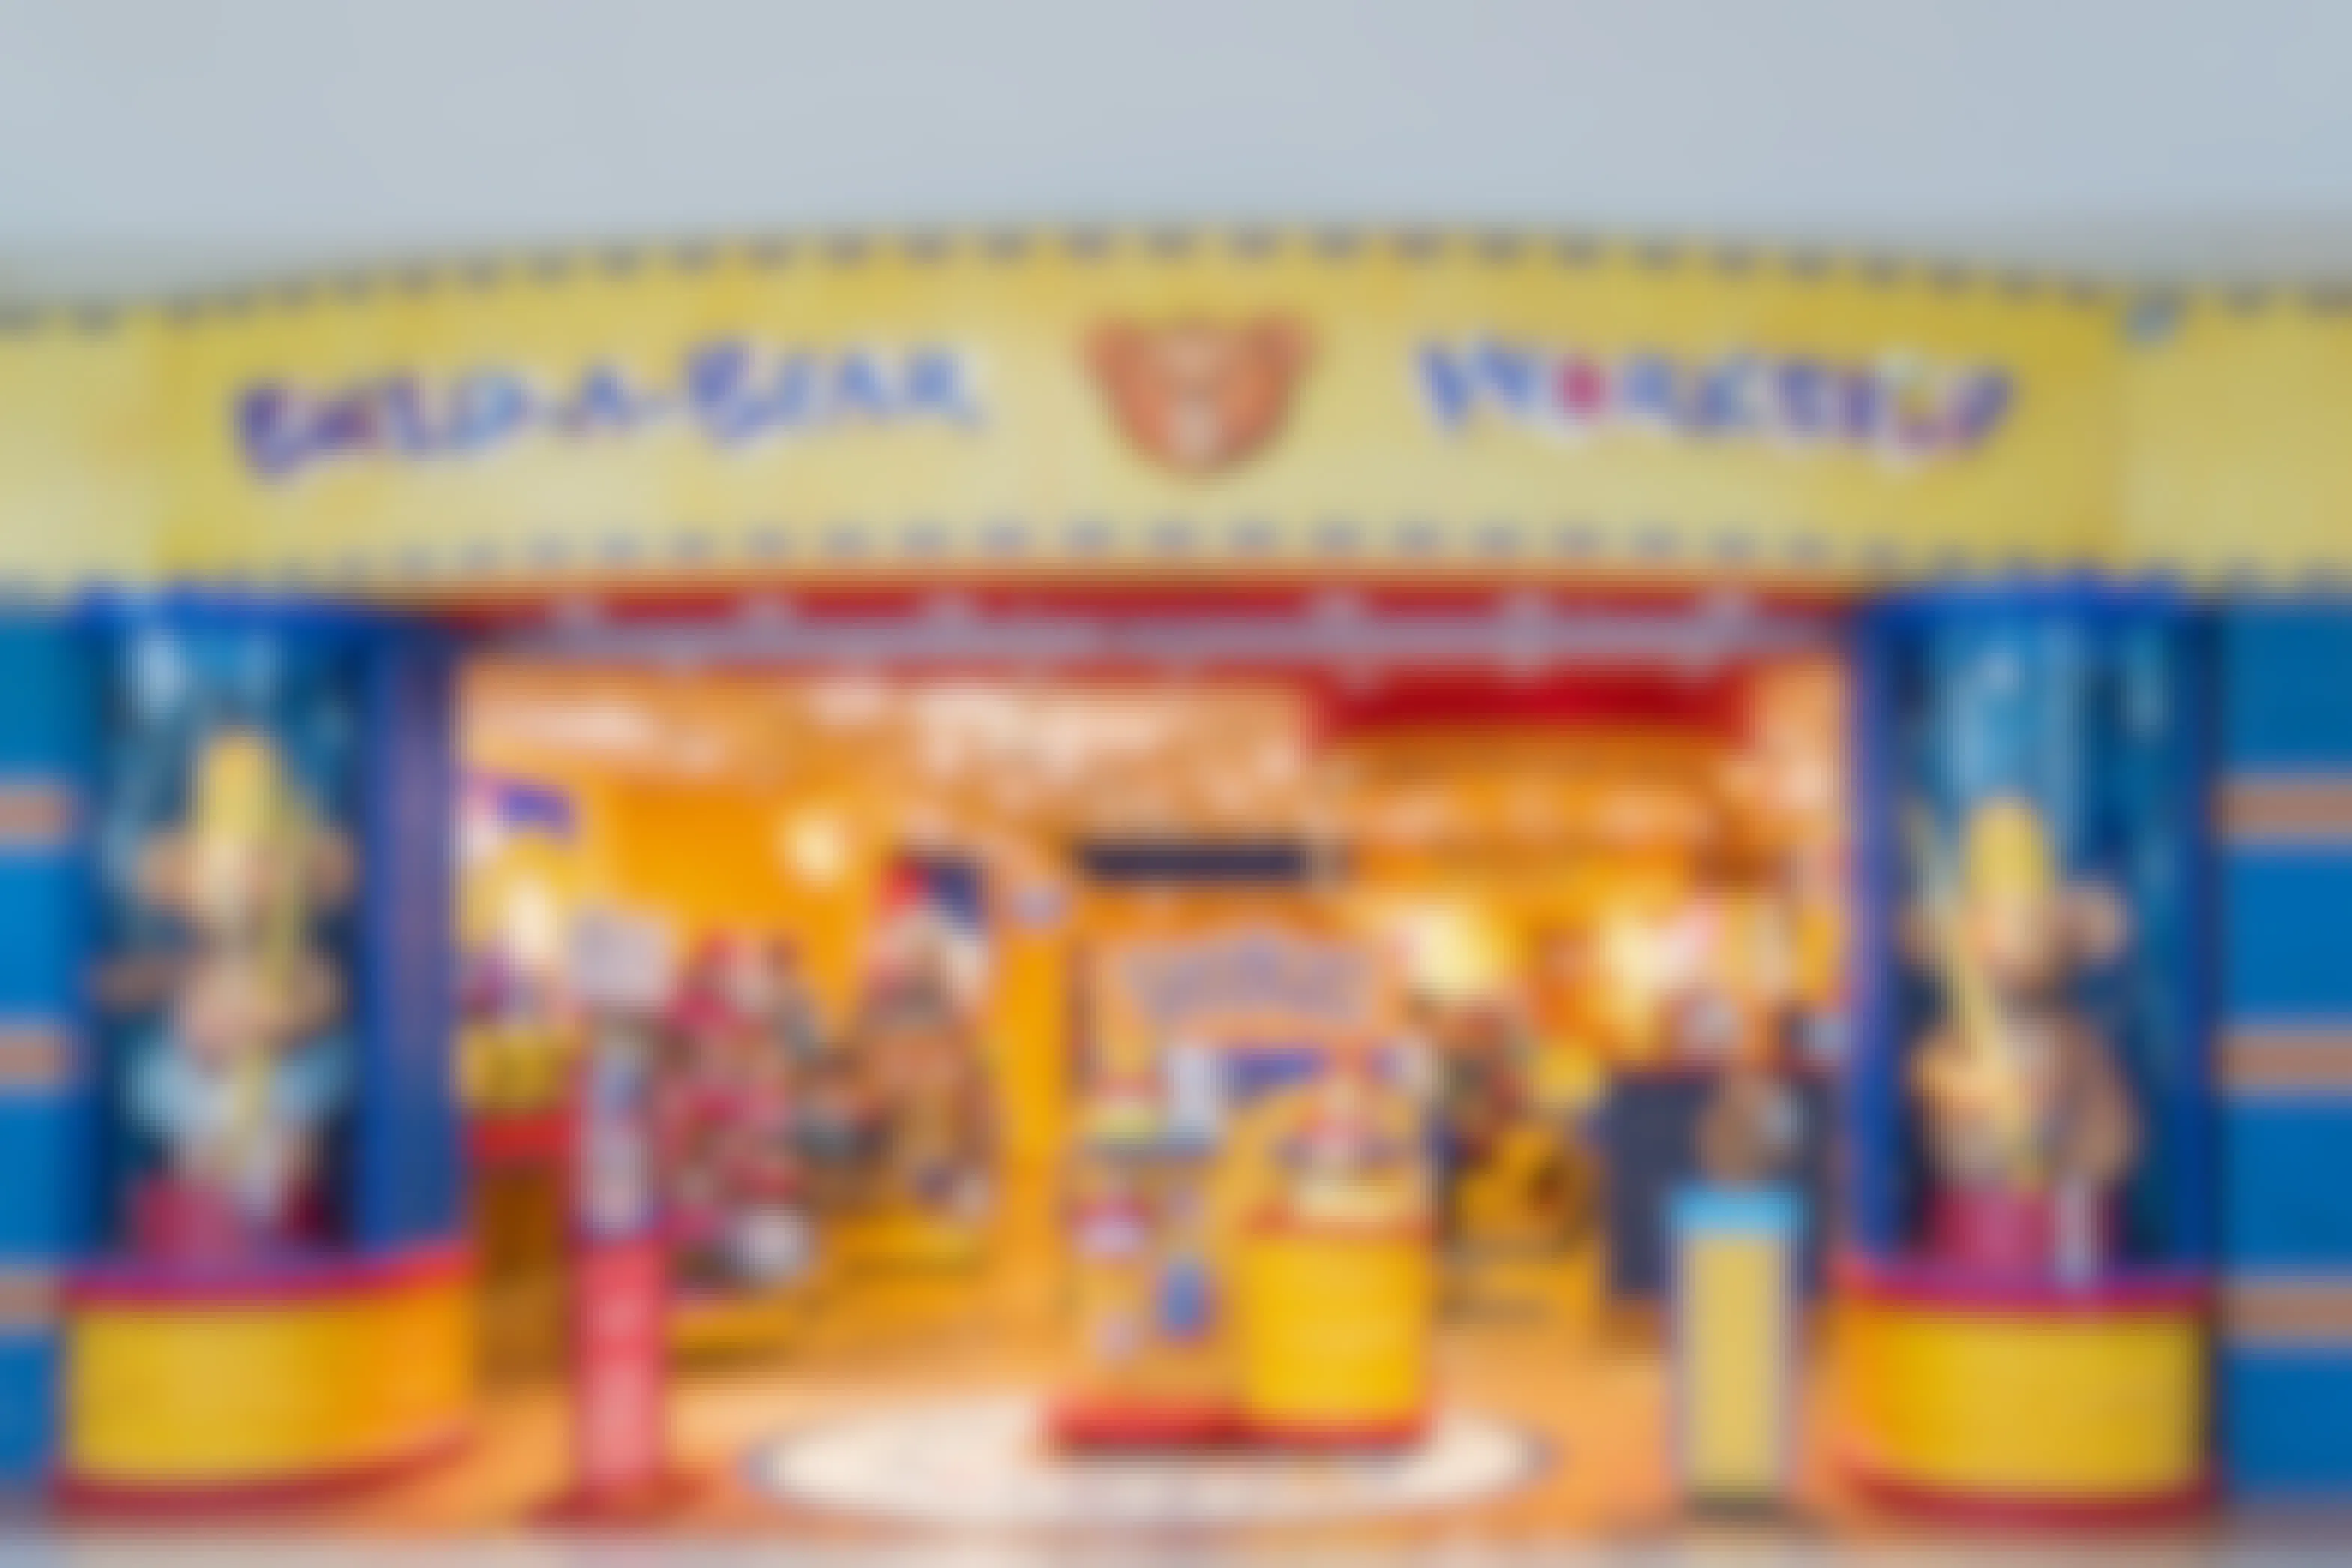 $500 Payments Coming Soon in Build-A-Bear Settlement